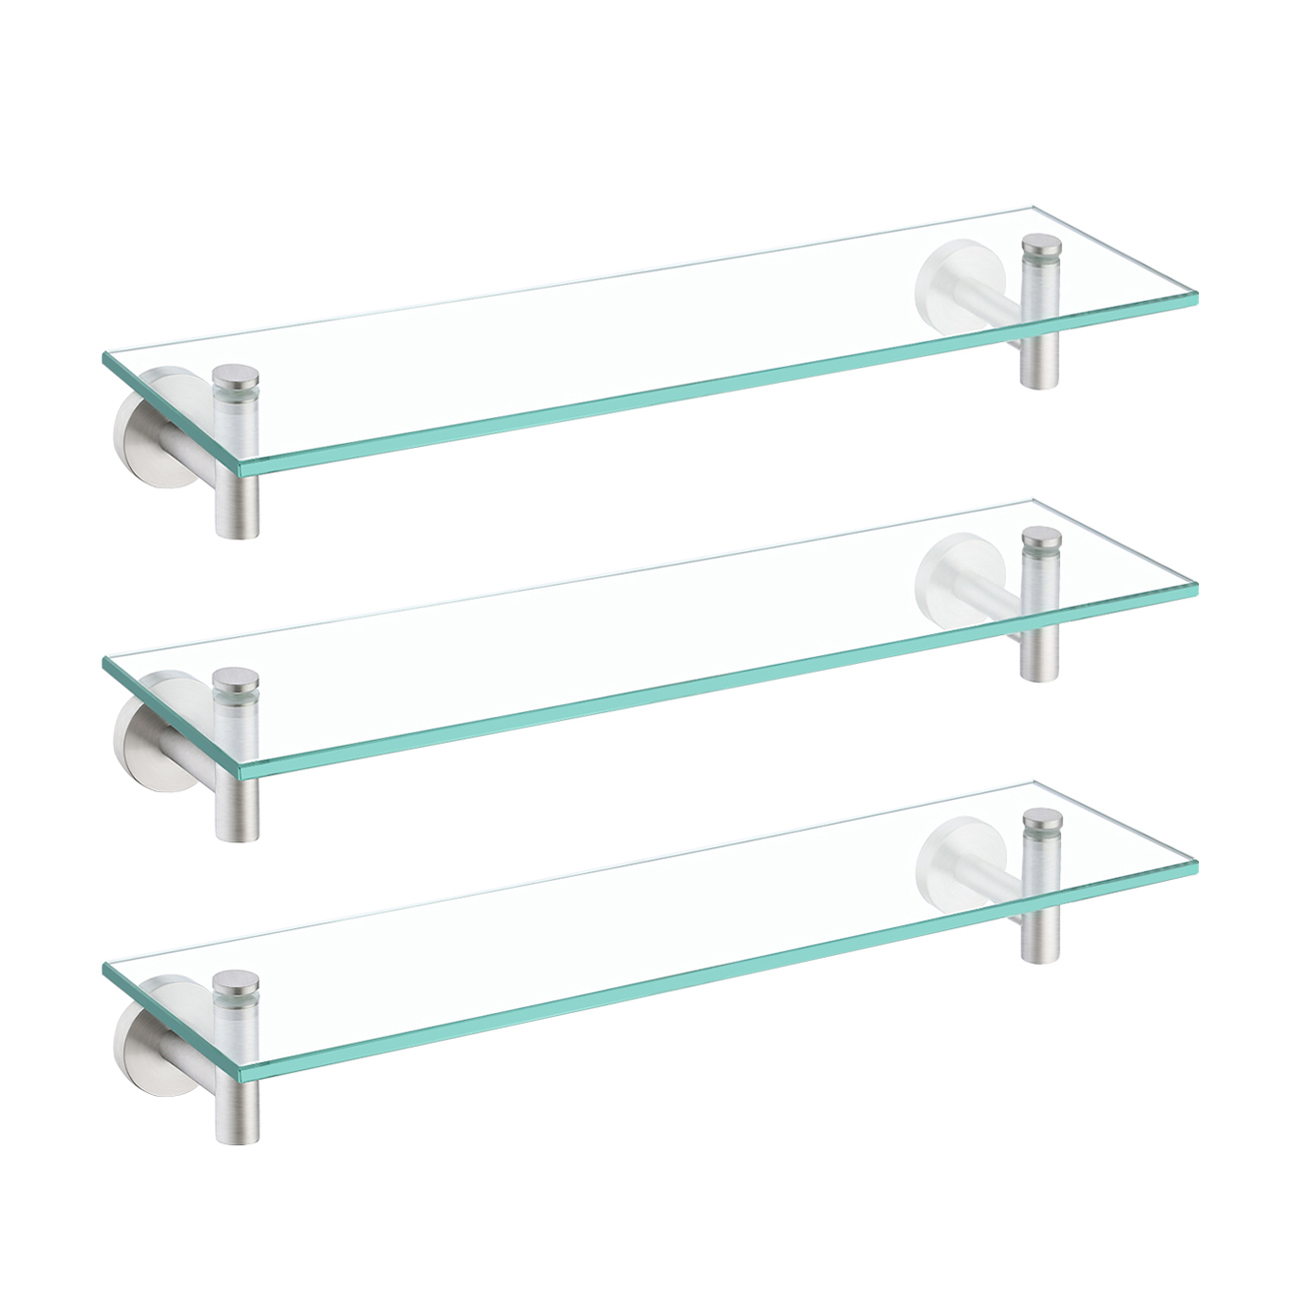 KES|Bathroom Glass Shelf Rectangular 20-Inch Floating Glass Shelves 2 Pack  with Rustproof Stainless Steel Brackets Wall Mounted Brushed Finish,  A2021-2-P2